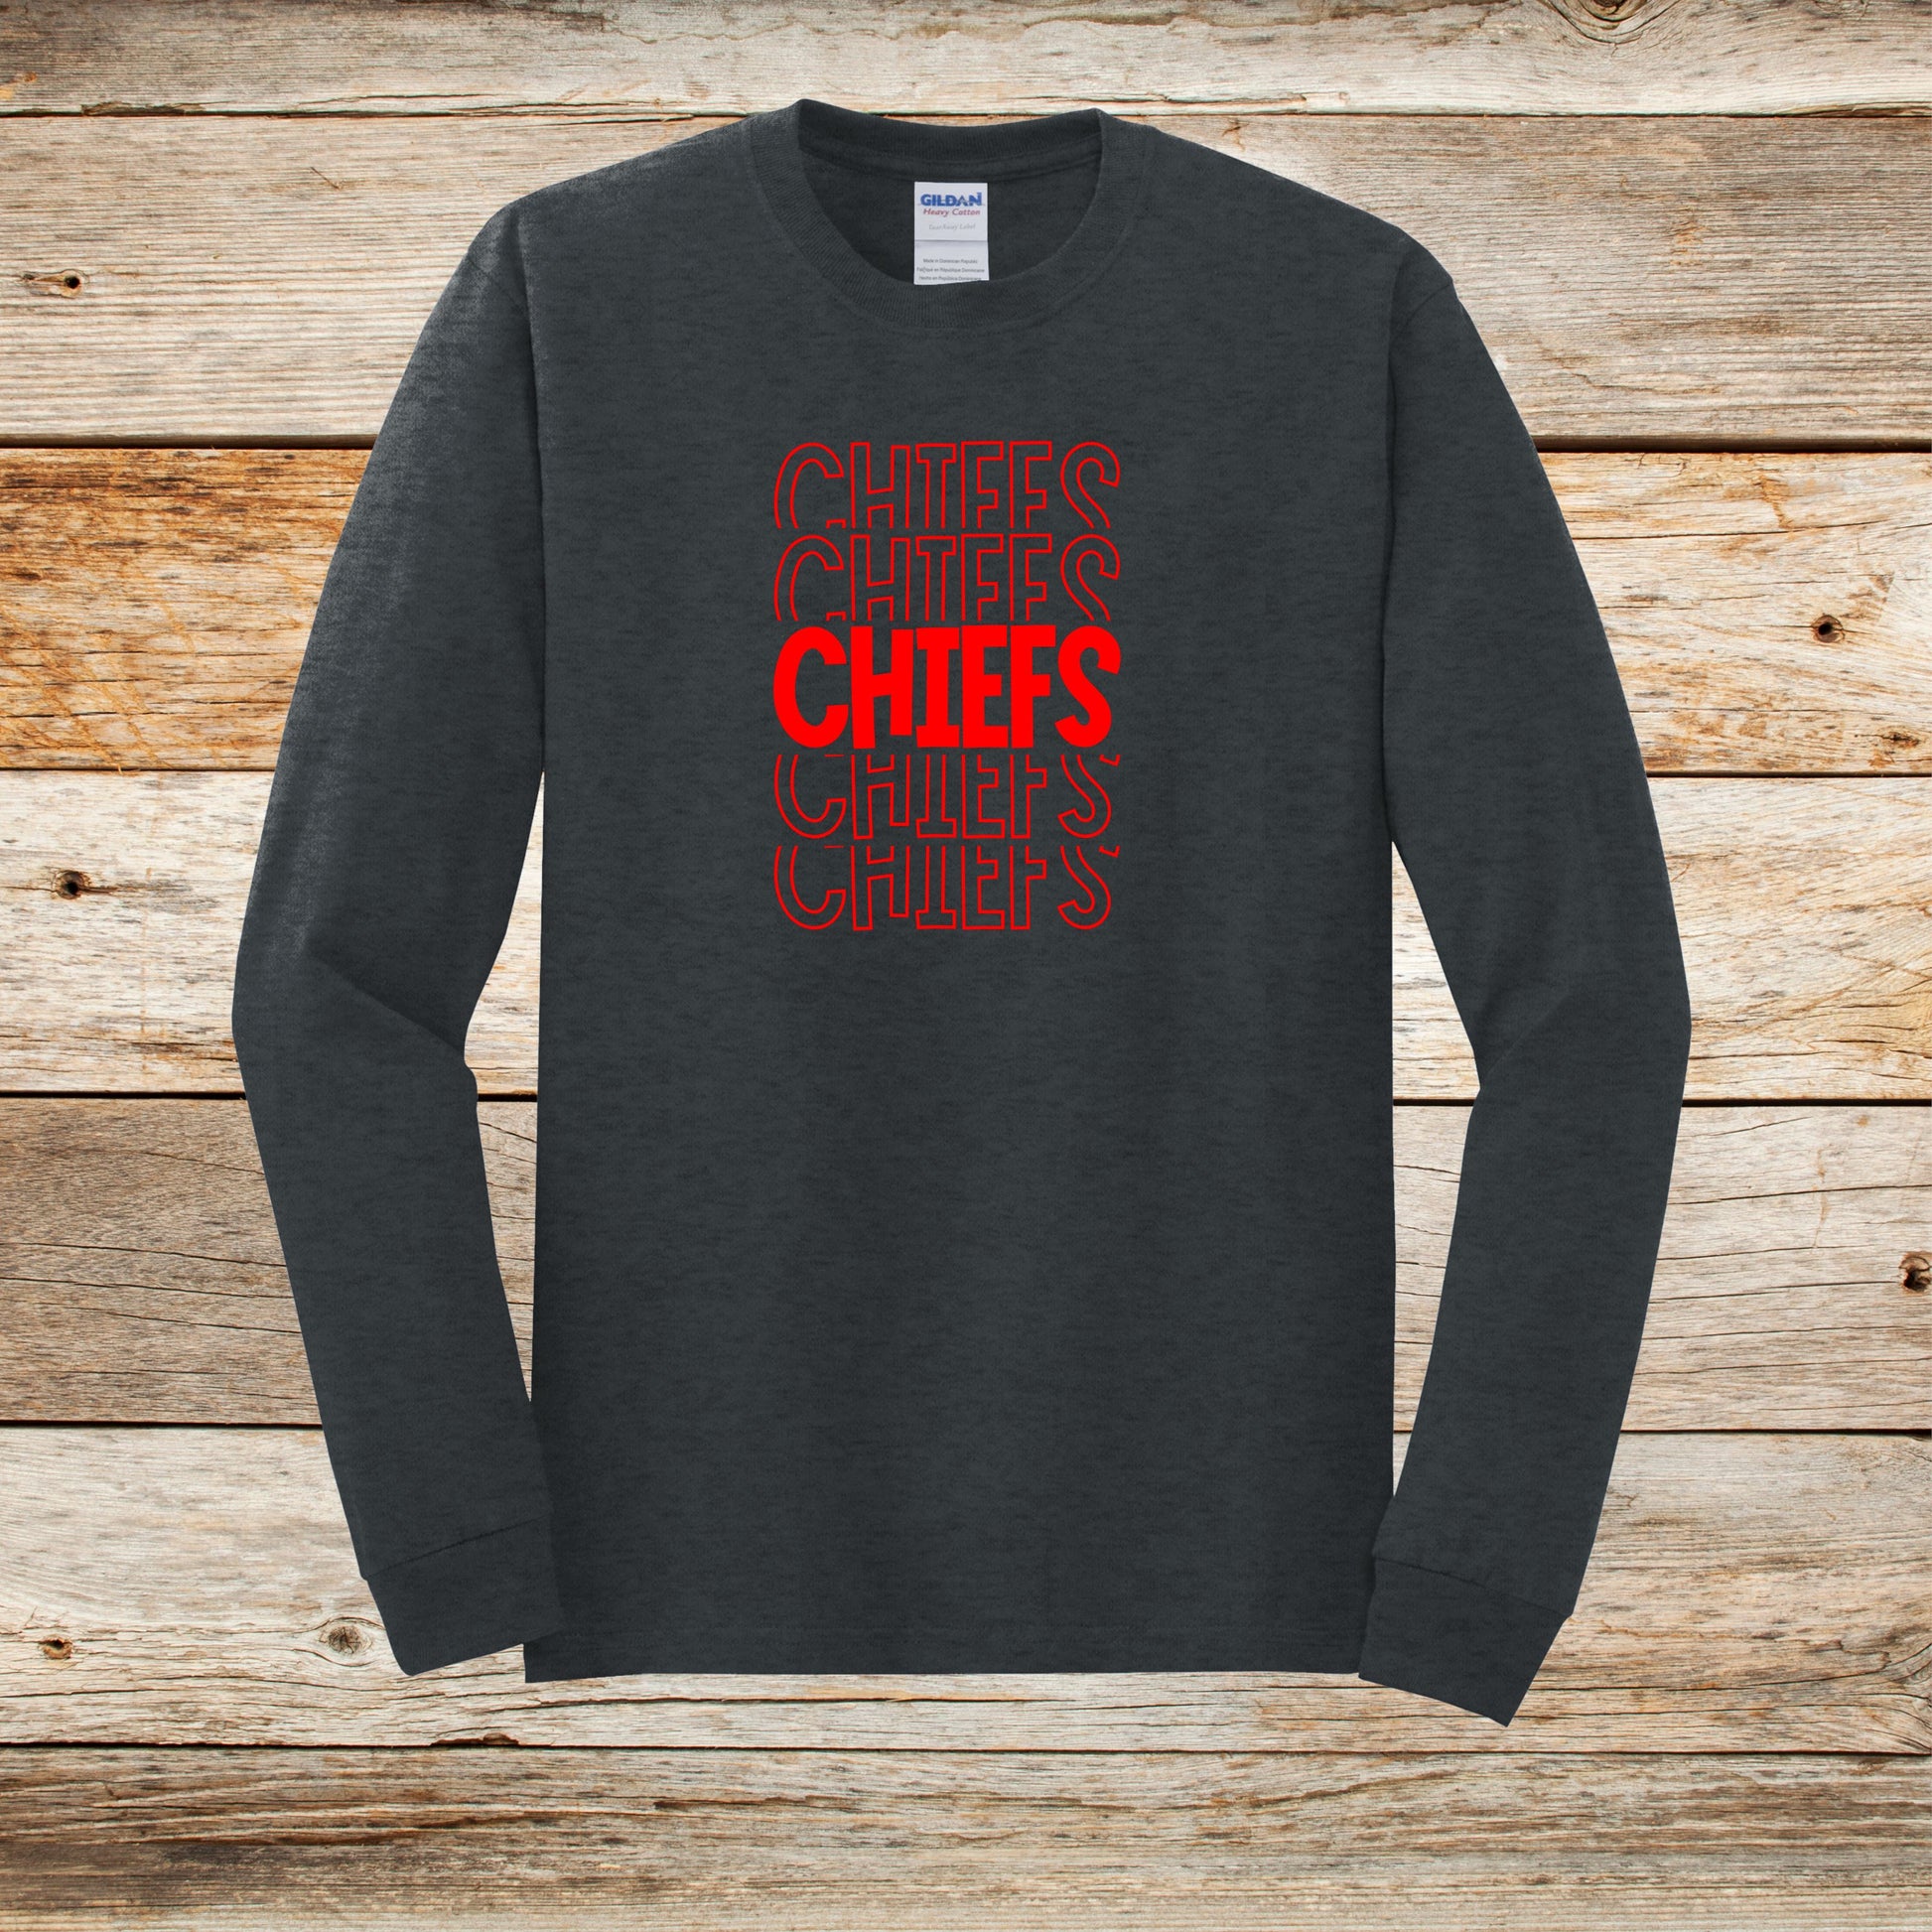 Football Long Sleeve T-Shirt - Chiefs Football - Chiefs - Adult and Children's Tee Shirts - Sports Long Sleeve T-Shirts Graphic Avenue Dark Heather Adult Small 